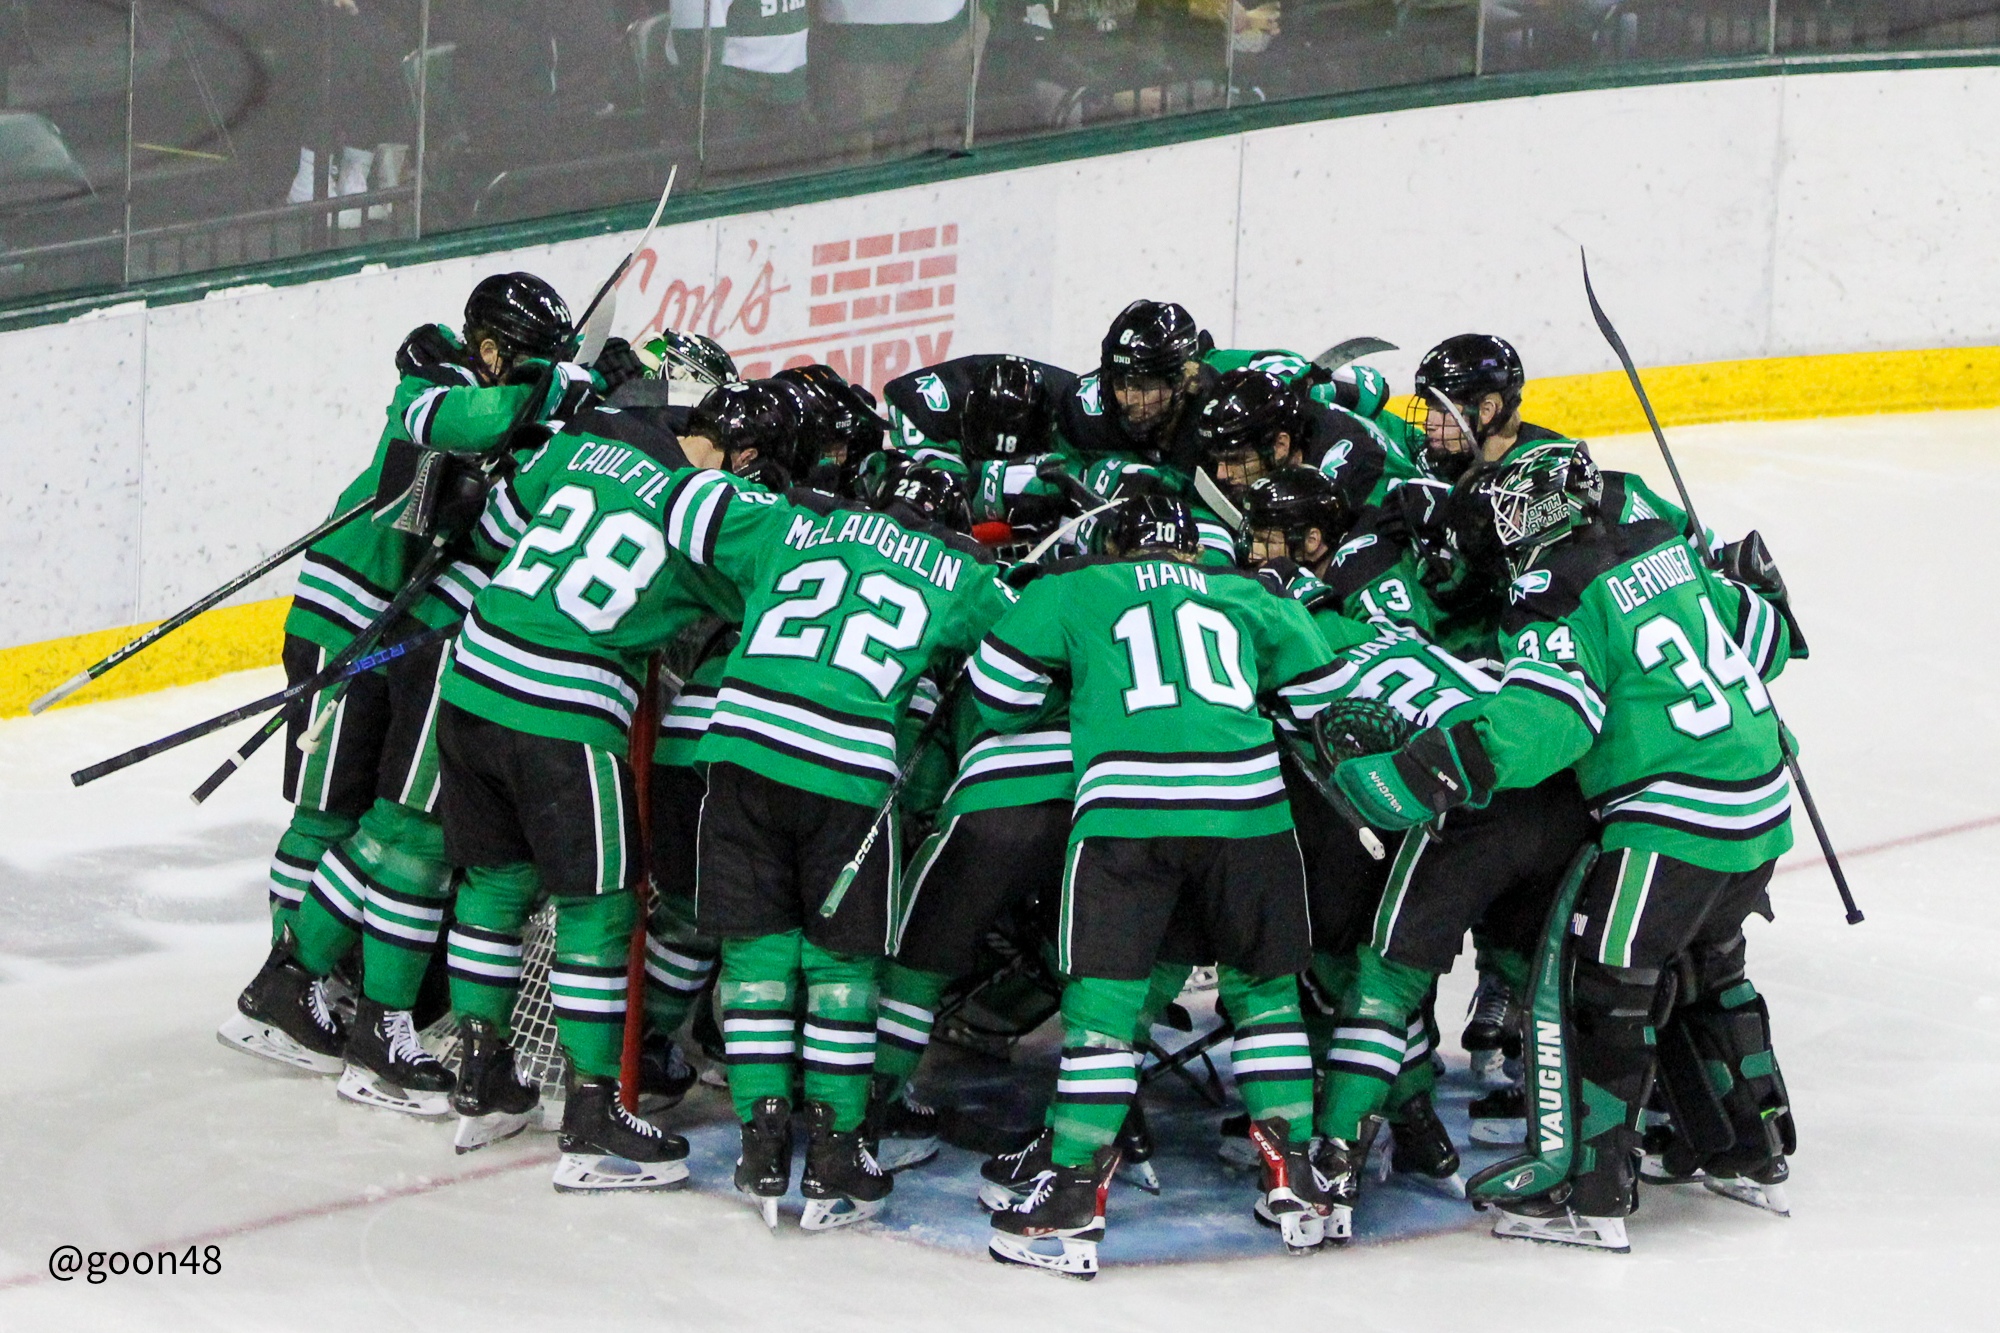 UND vs. BSU in Pictures, Game 1